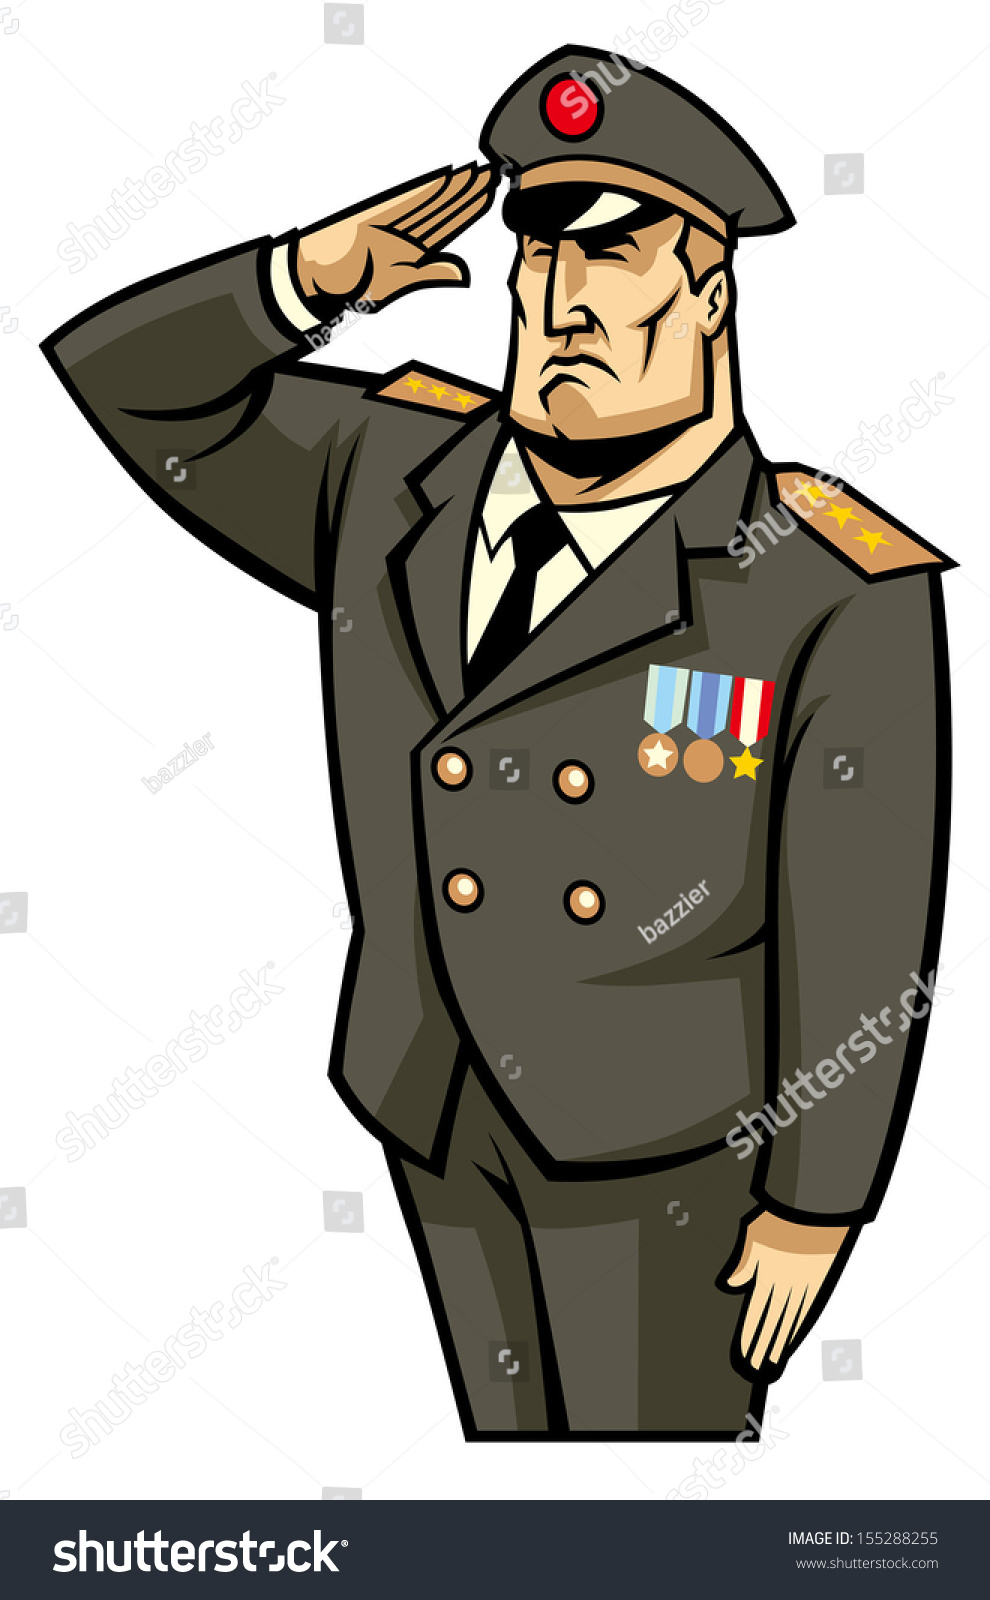 clipart of military salute - photo #43